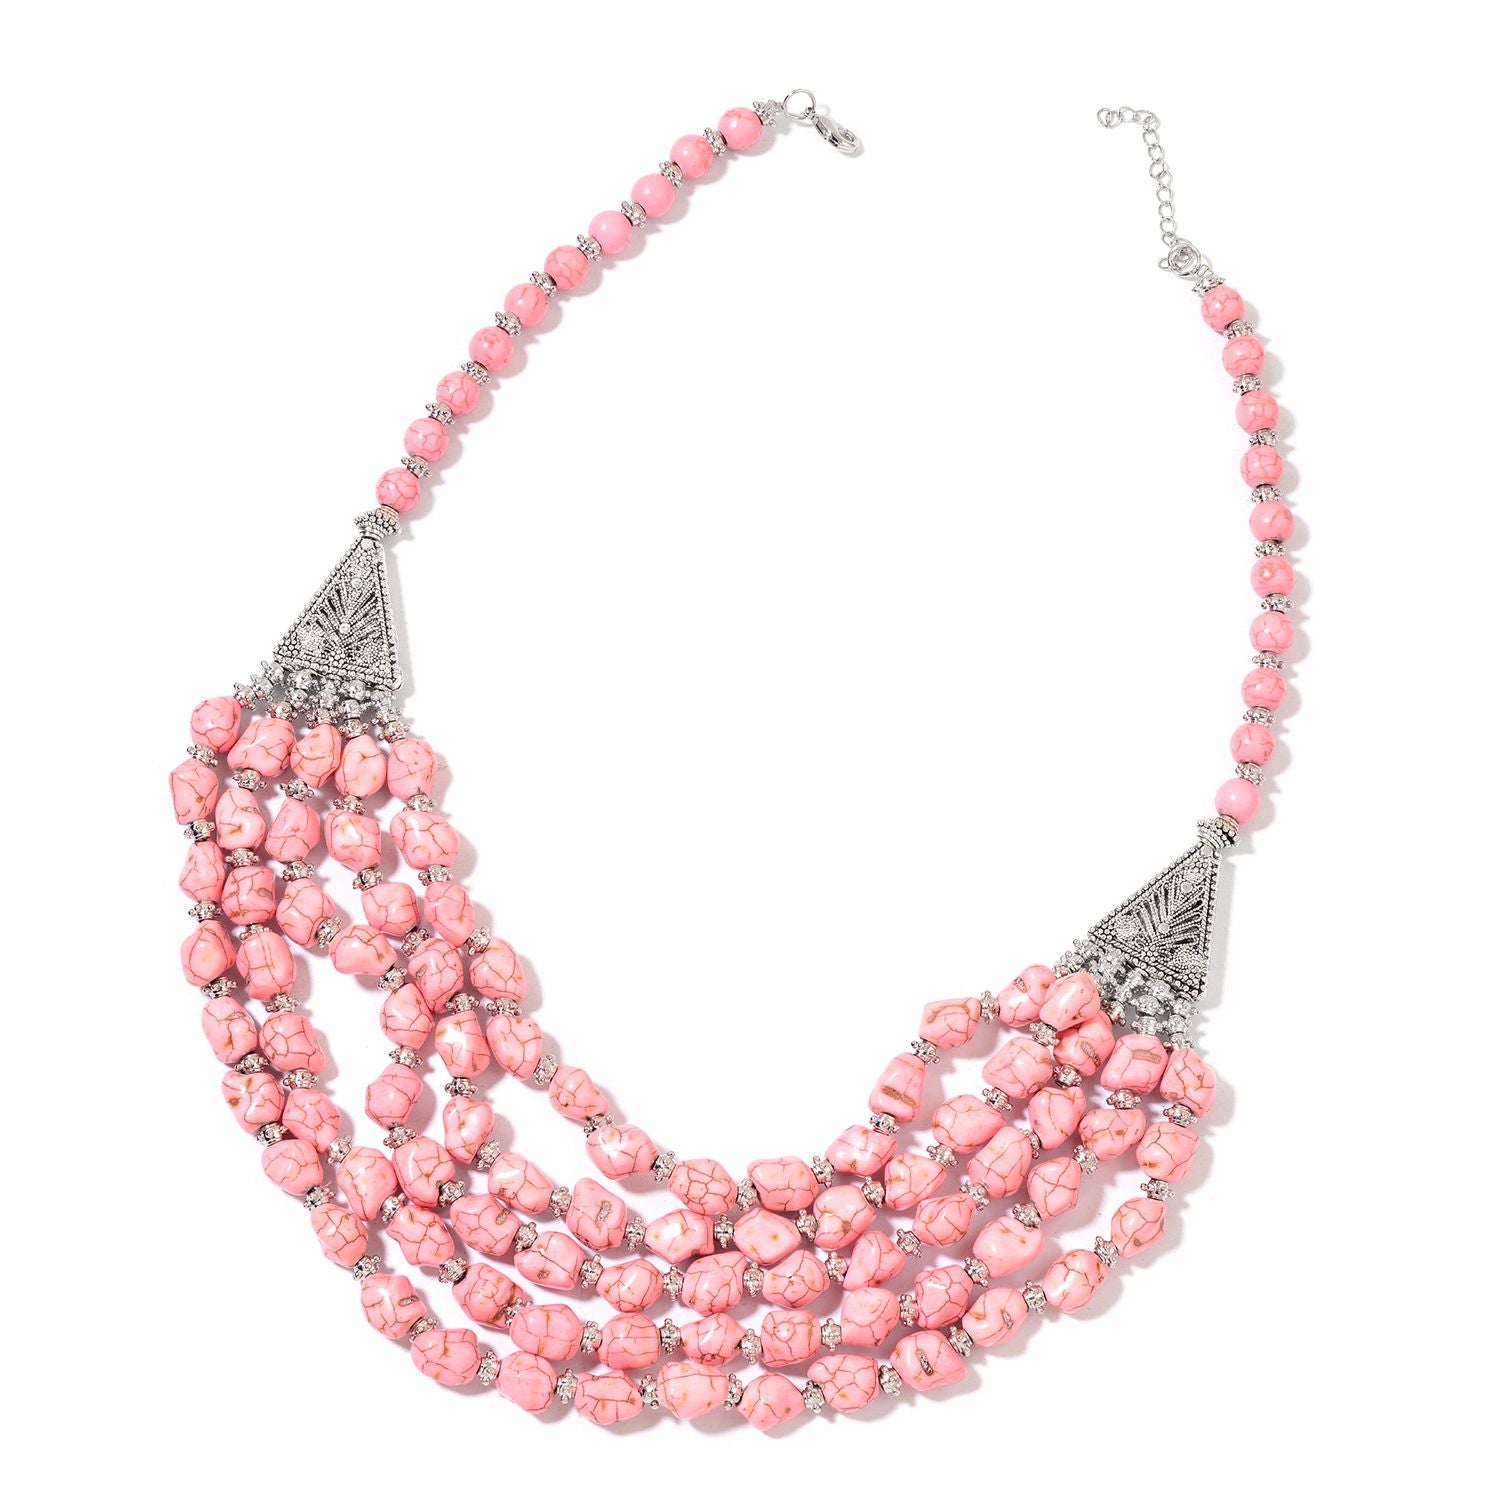 Pink Howlite Triple Row Drape Necklace in Silvertone (20.00 In) TGW 1004.00 cts. - Houzz of DVA Boutique